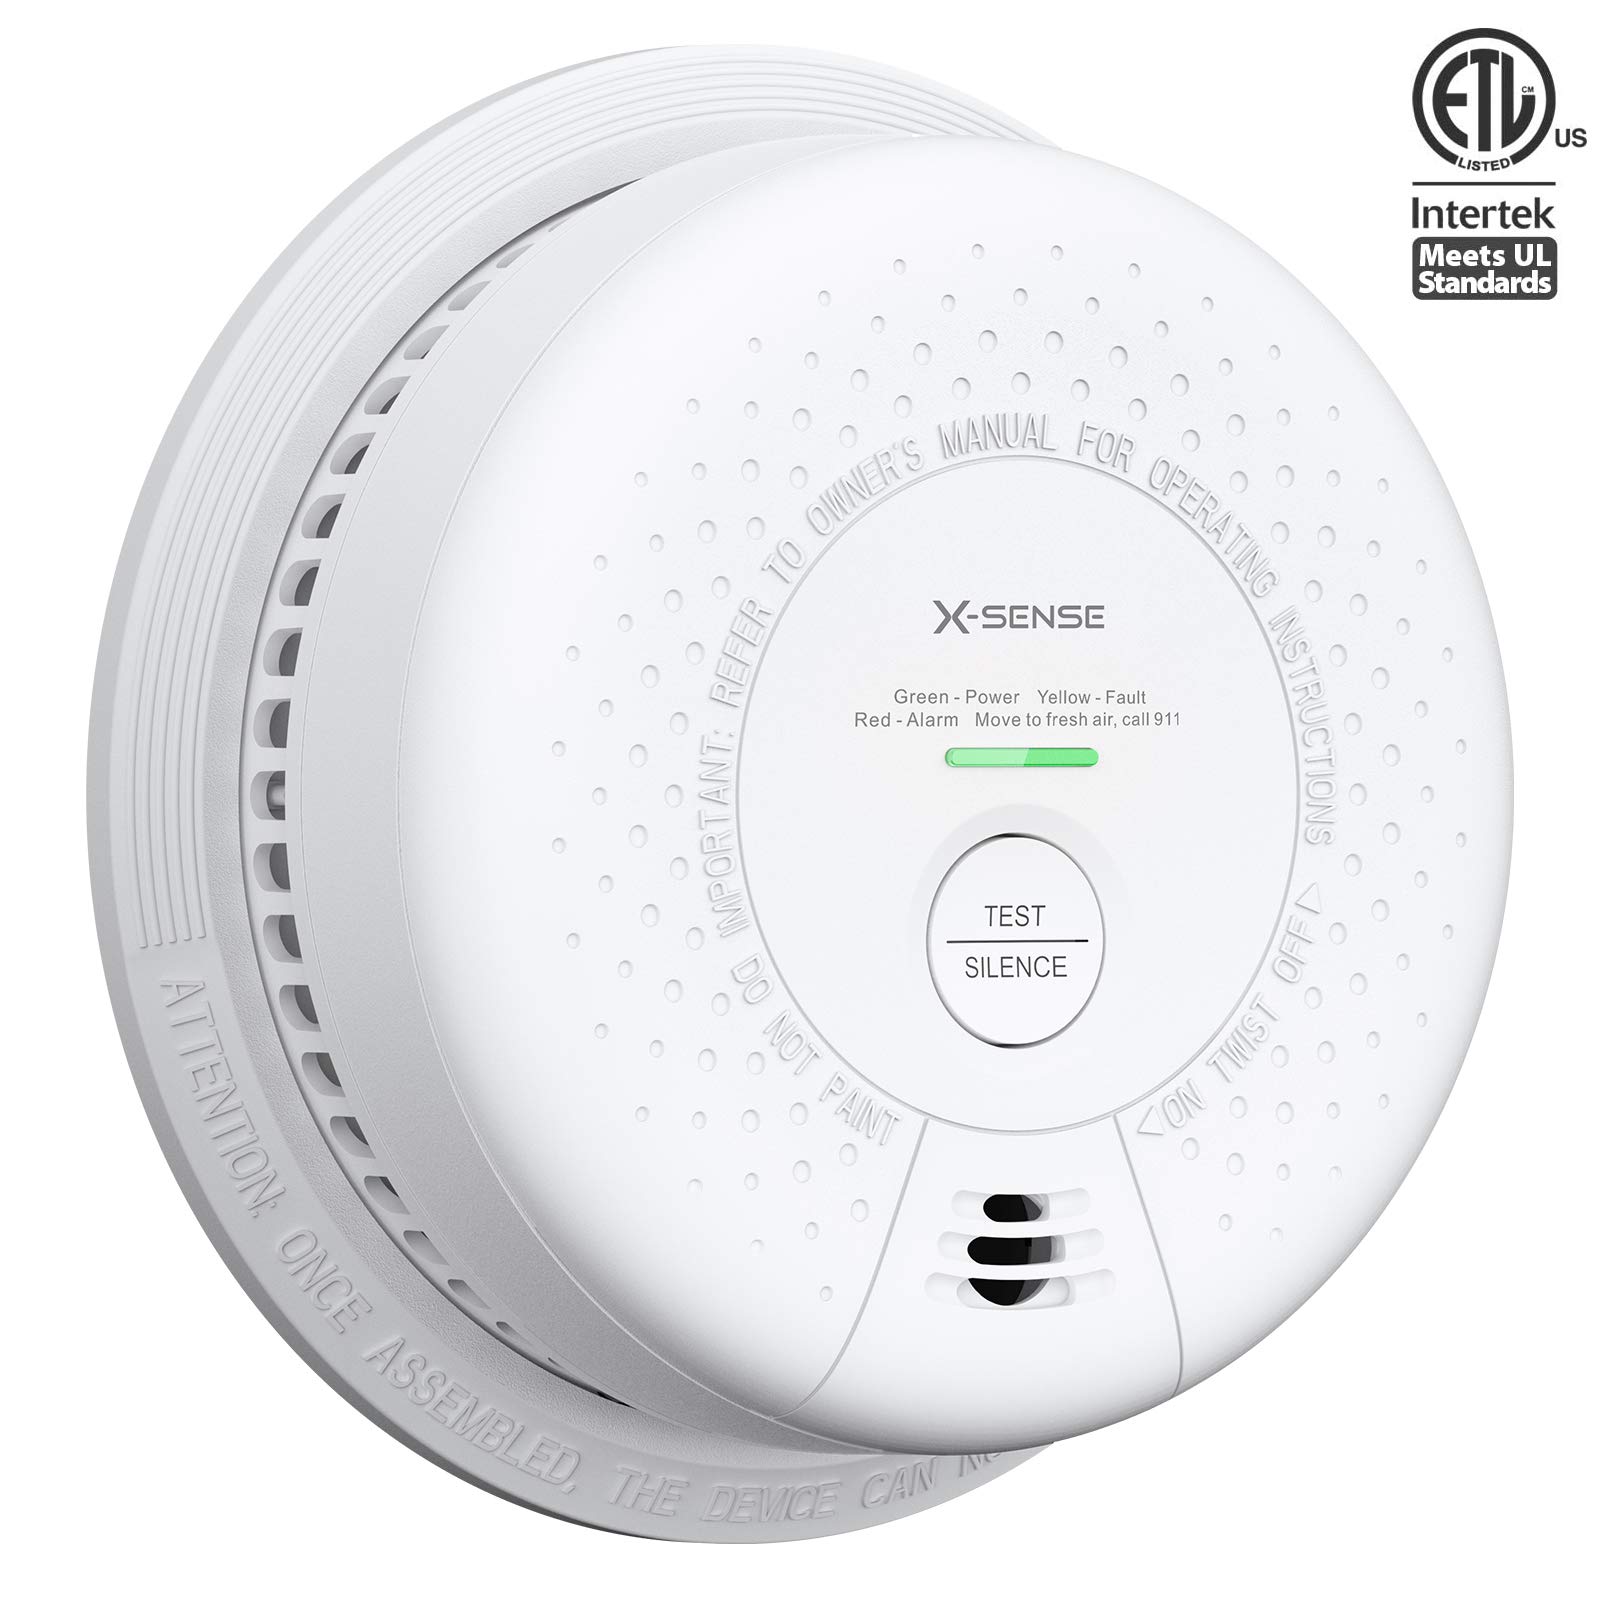 X-Sense SC03 10-Year Battery (Not Hardwired) Smoke and Carbon Monoxide Detector Alarm, Compliant with UL 217 & UL 2034 Standards, Silence Button & LED Indicator, Auto-Check, 5-Pack